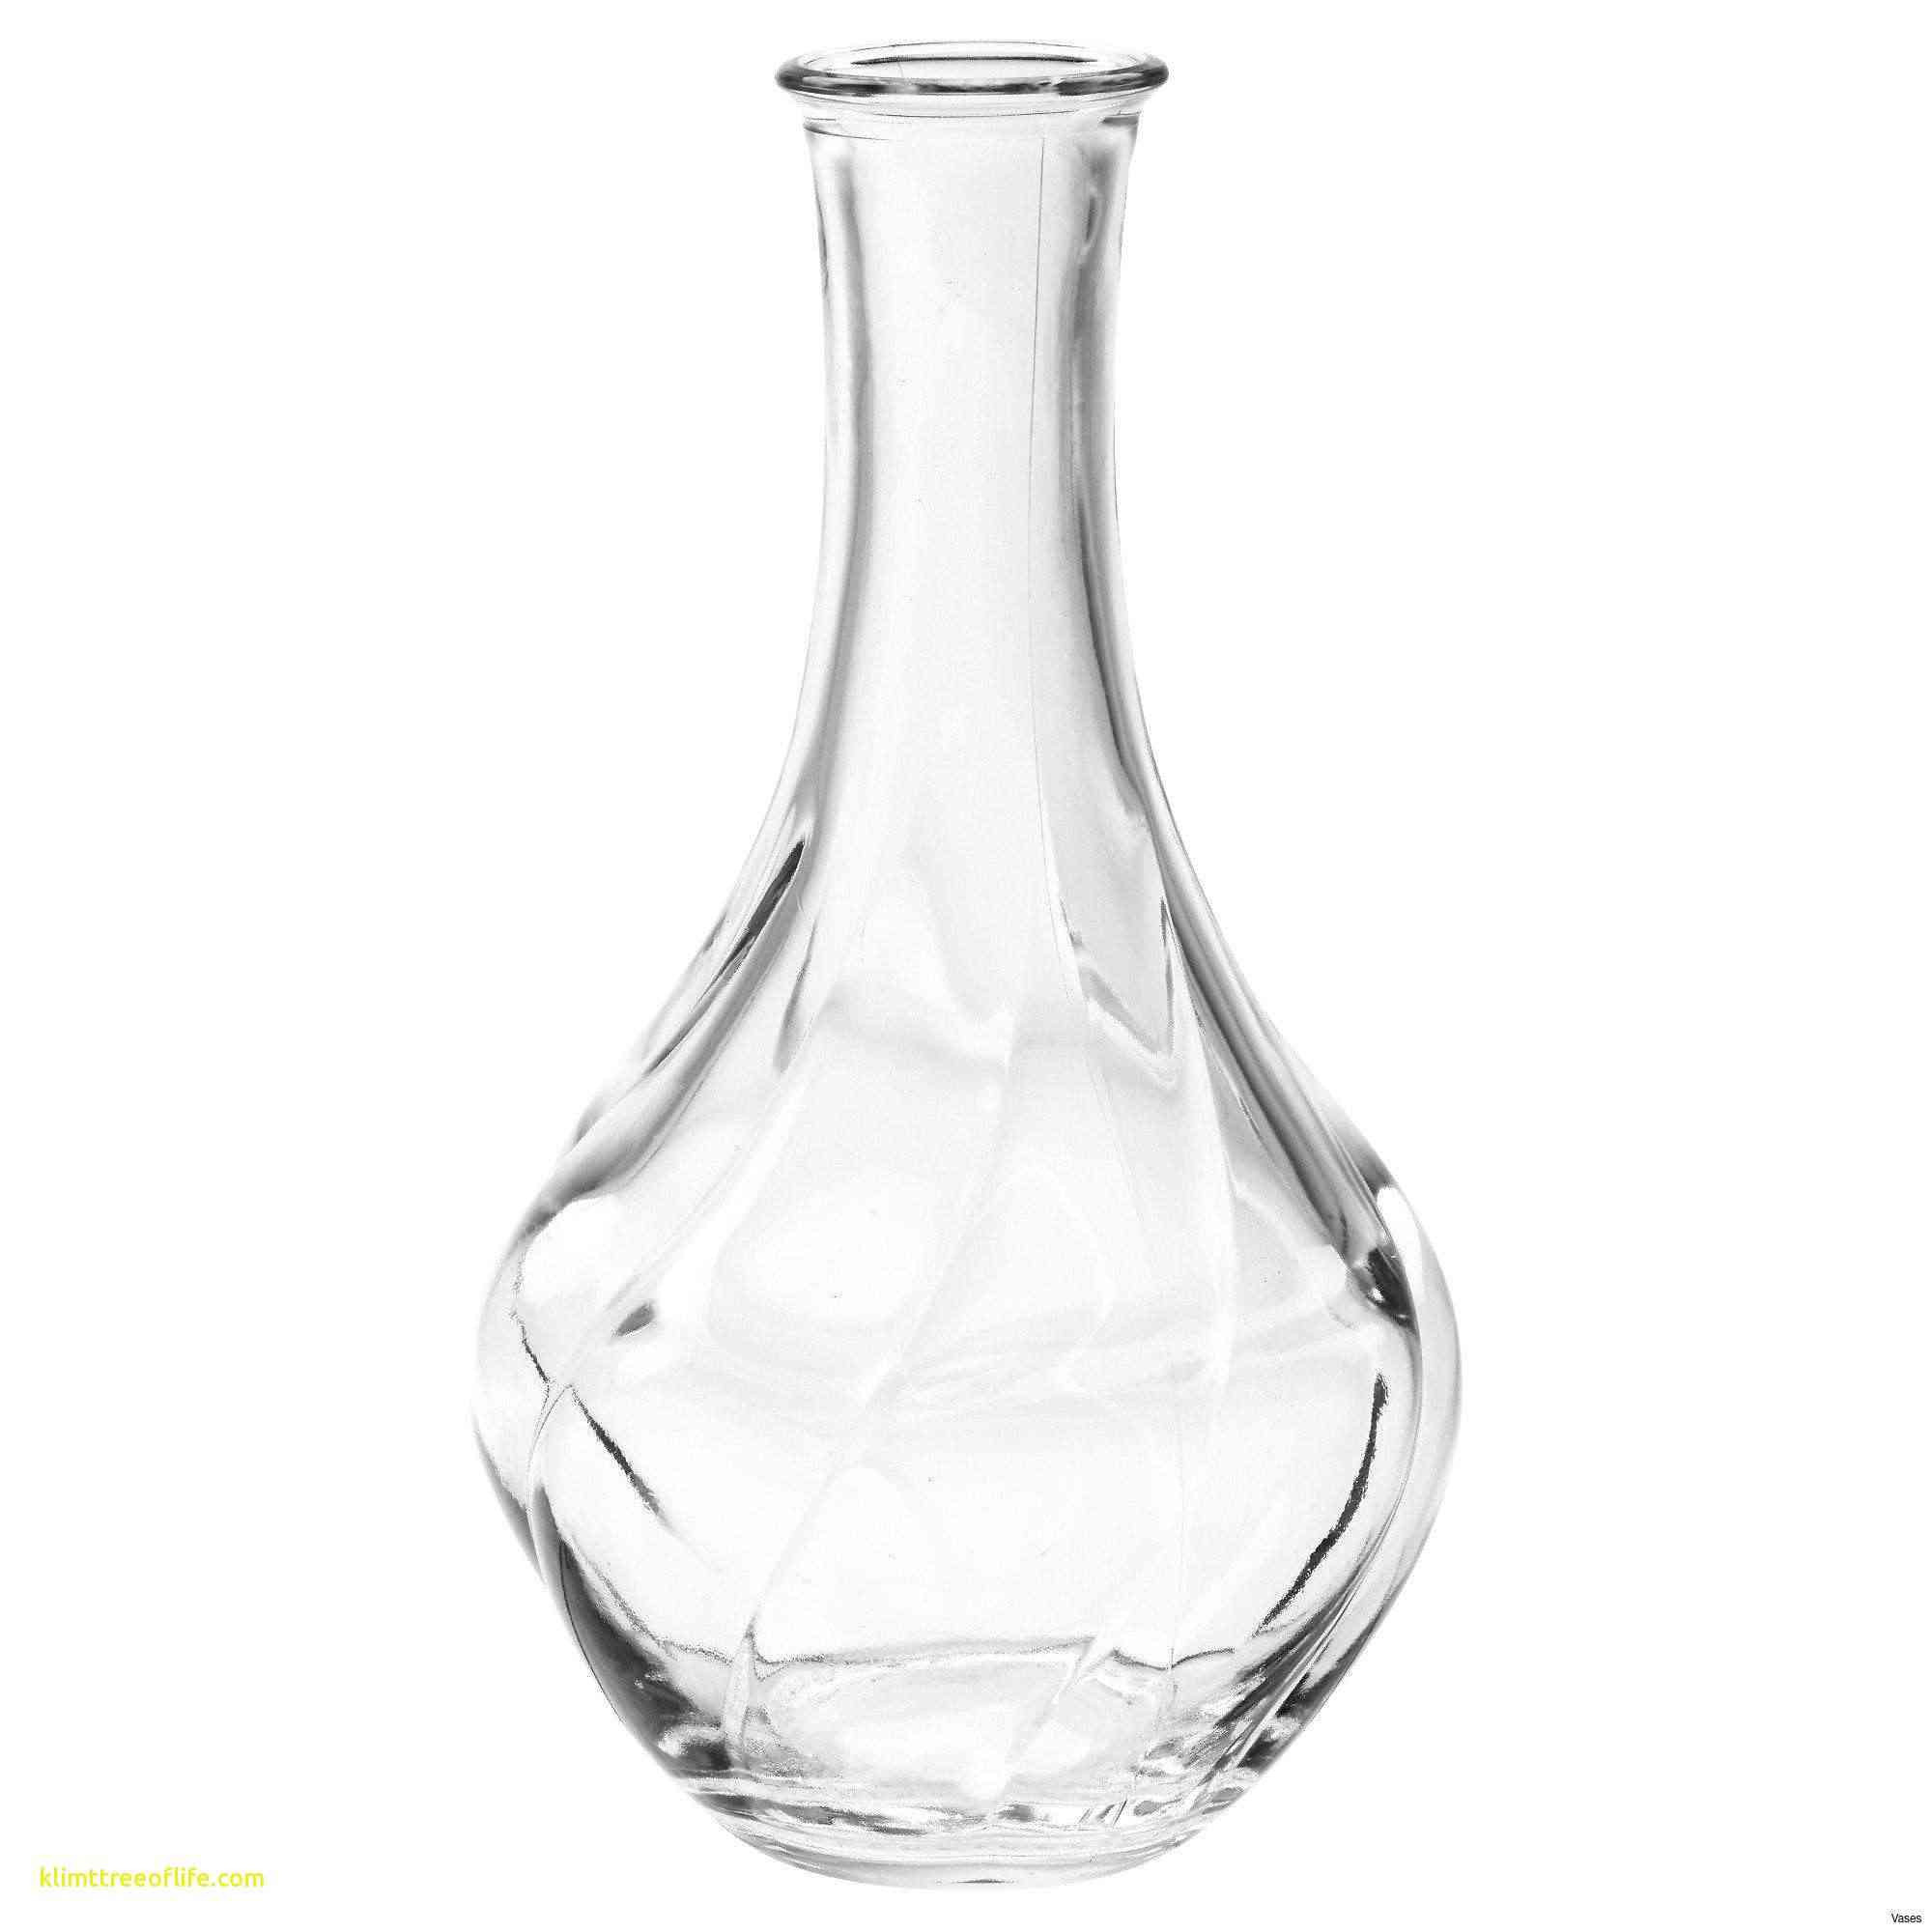 acrylic vase stand of big white vase gallery paint a picture luxury h vases paint vase i with regard to big white vase gallery paint a picture luxury h vases paint vase i 0d with glue and food